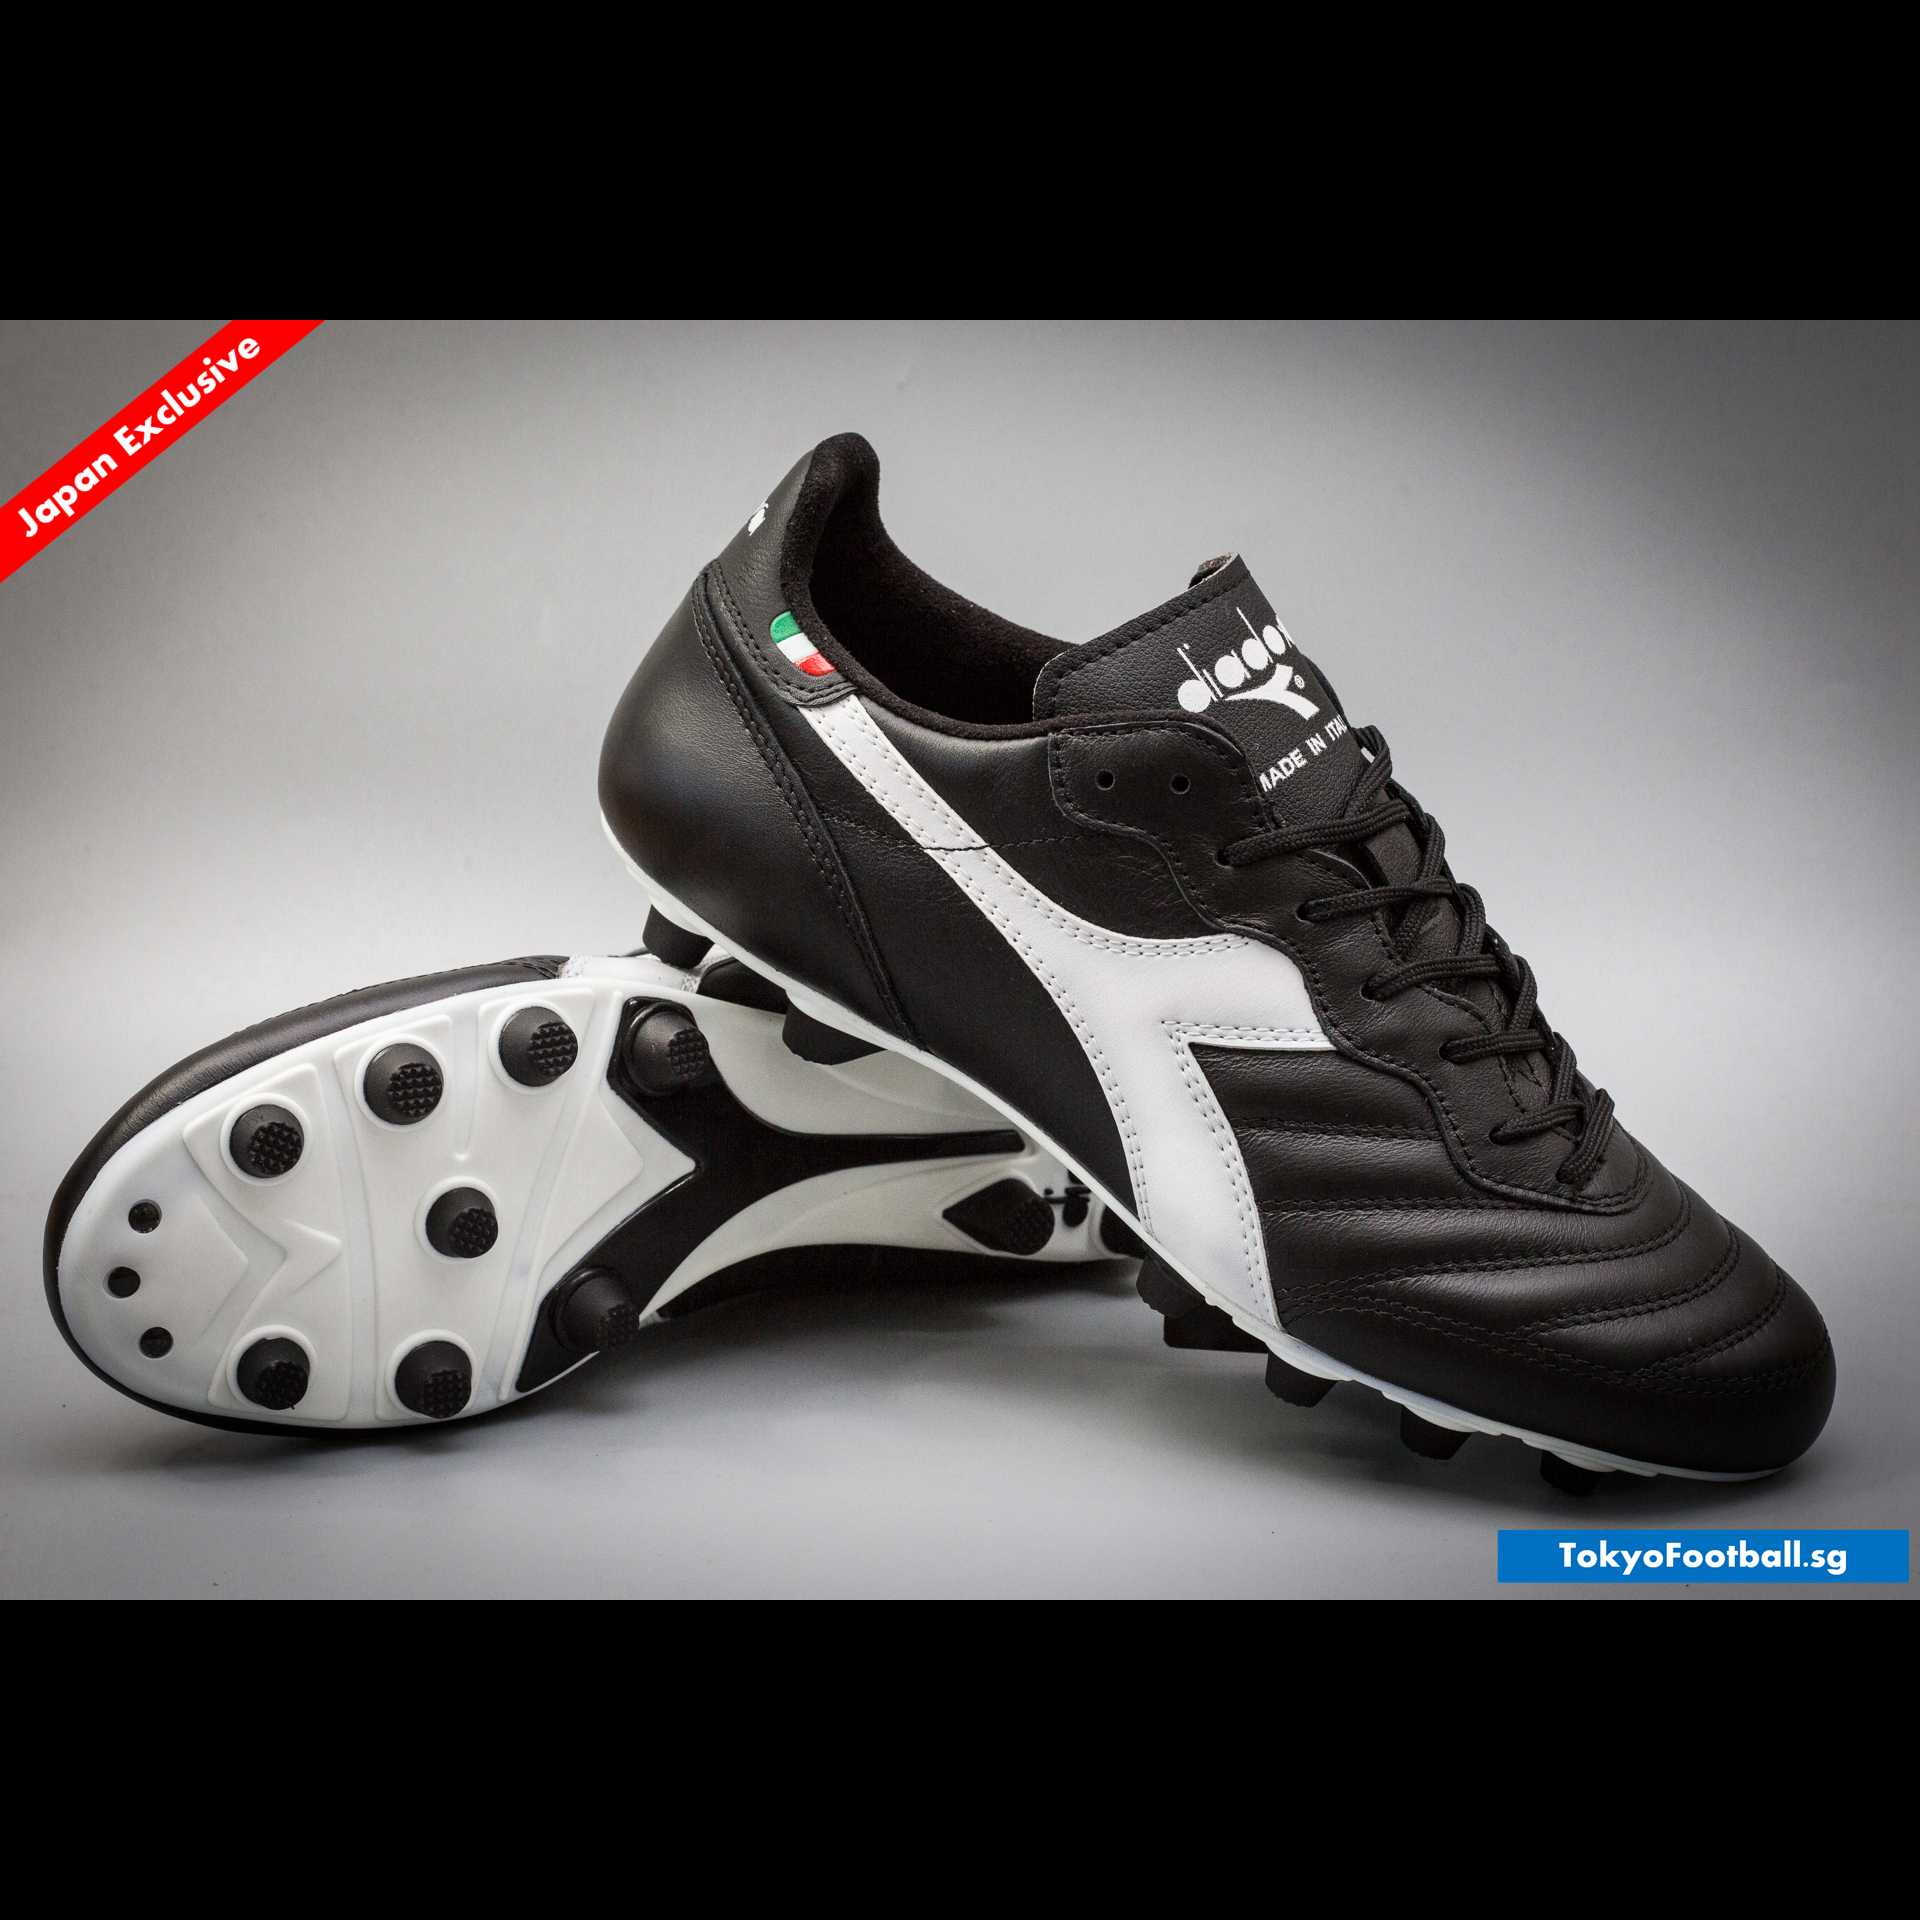 rugby tokyo football boots shoes 